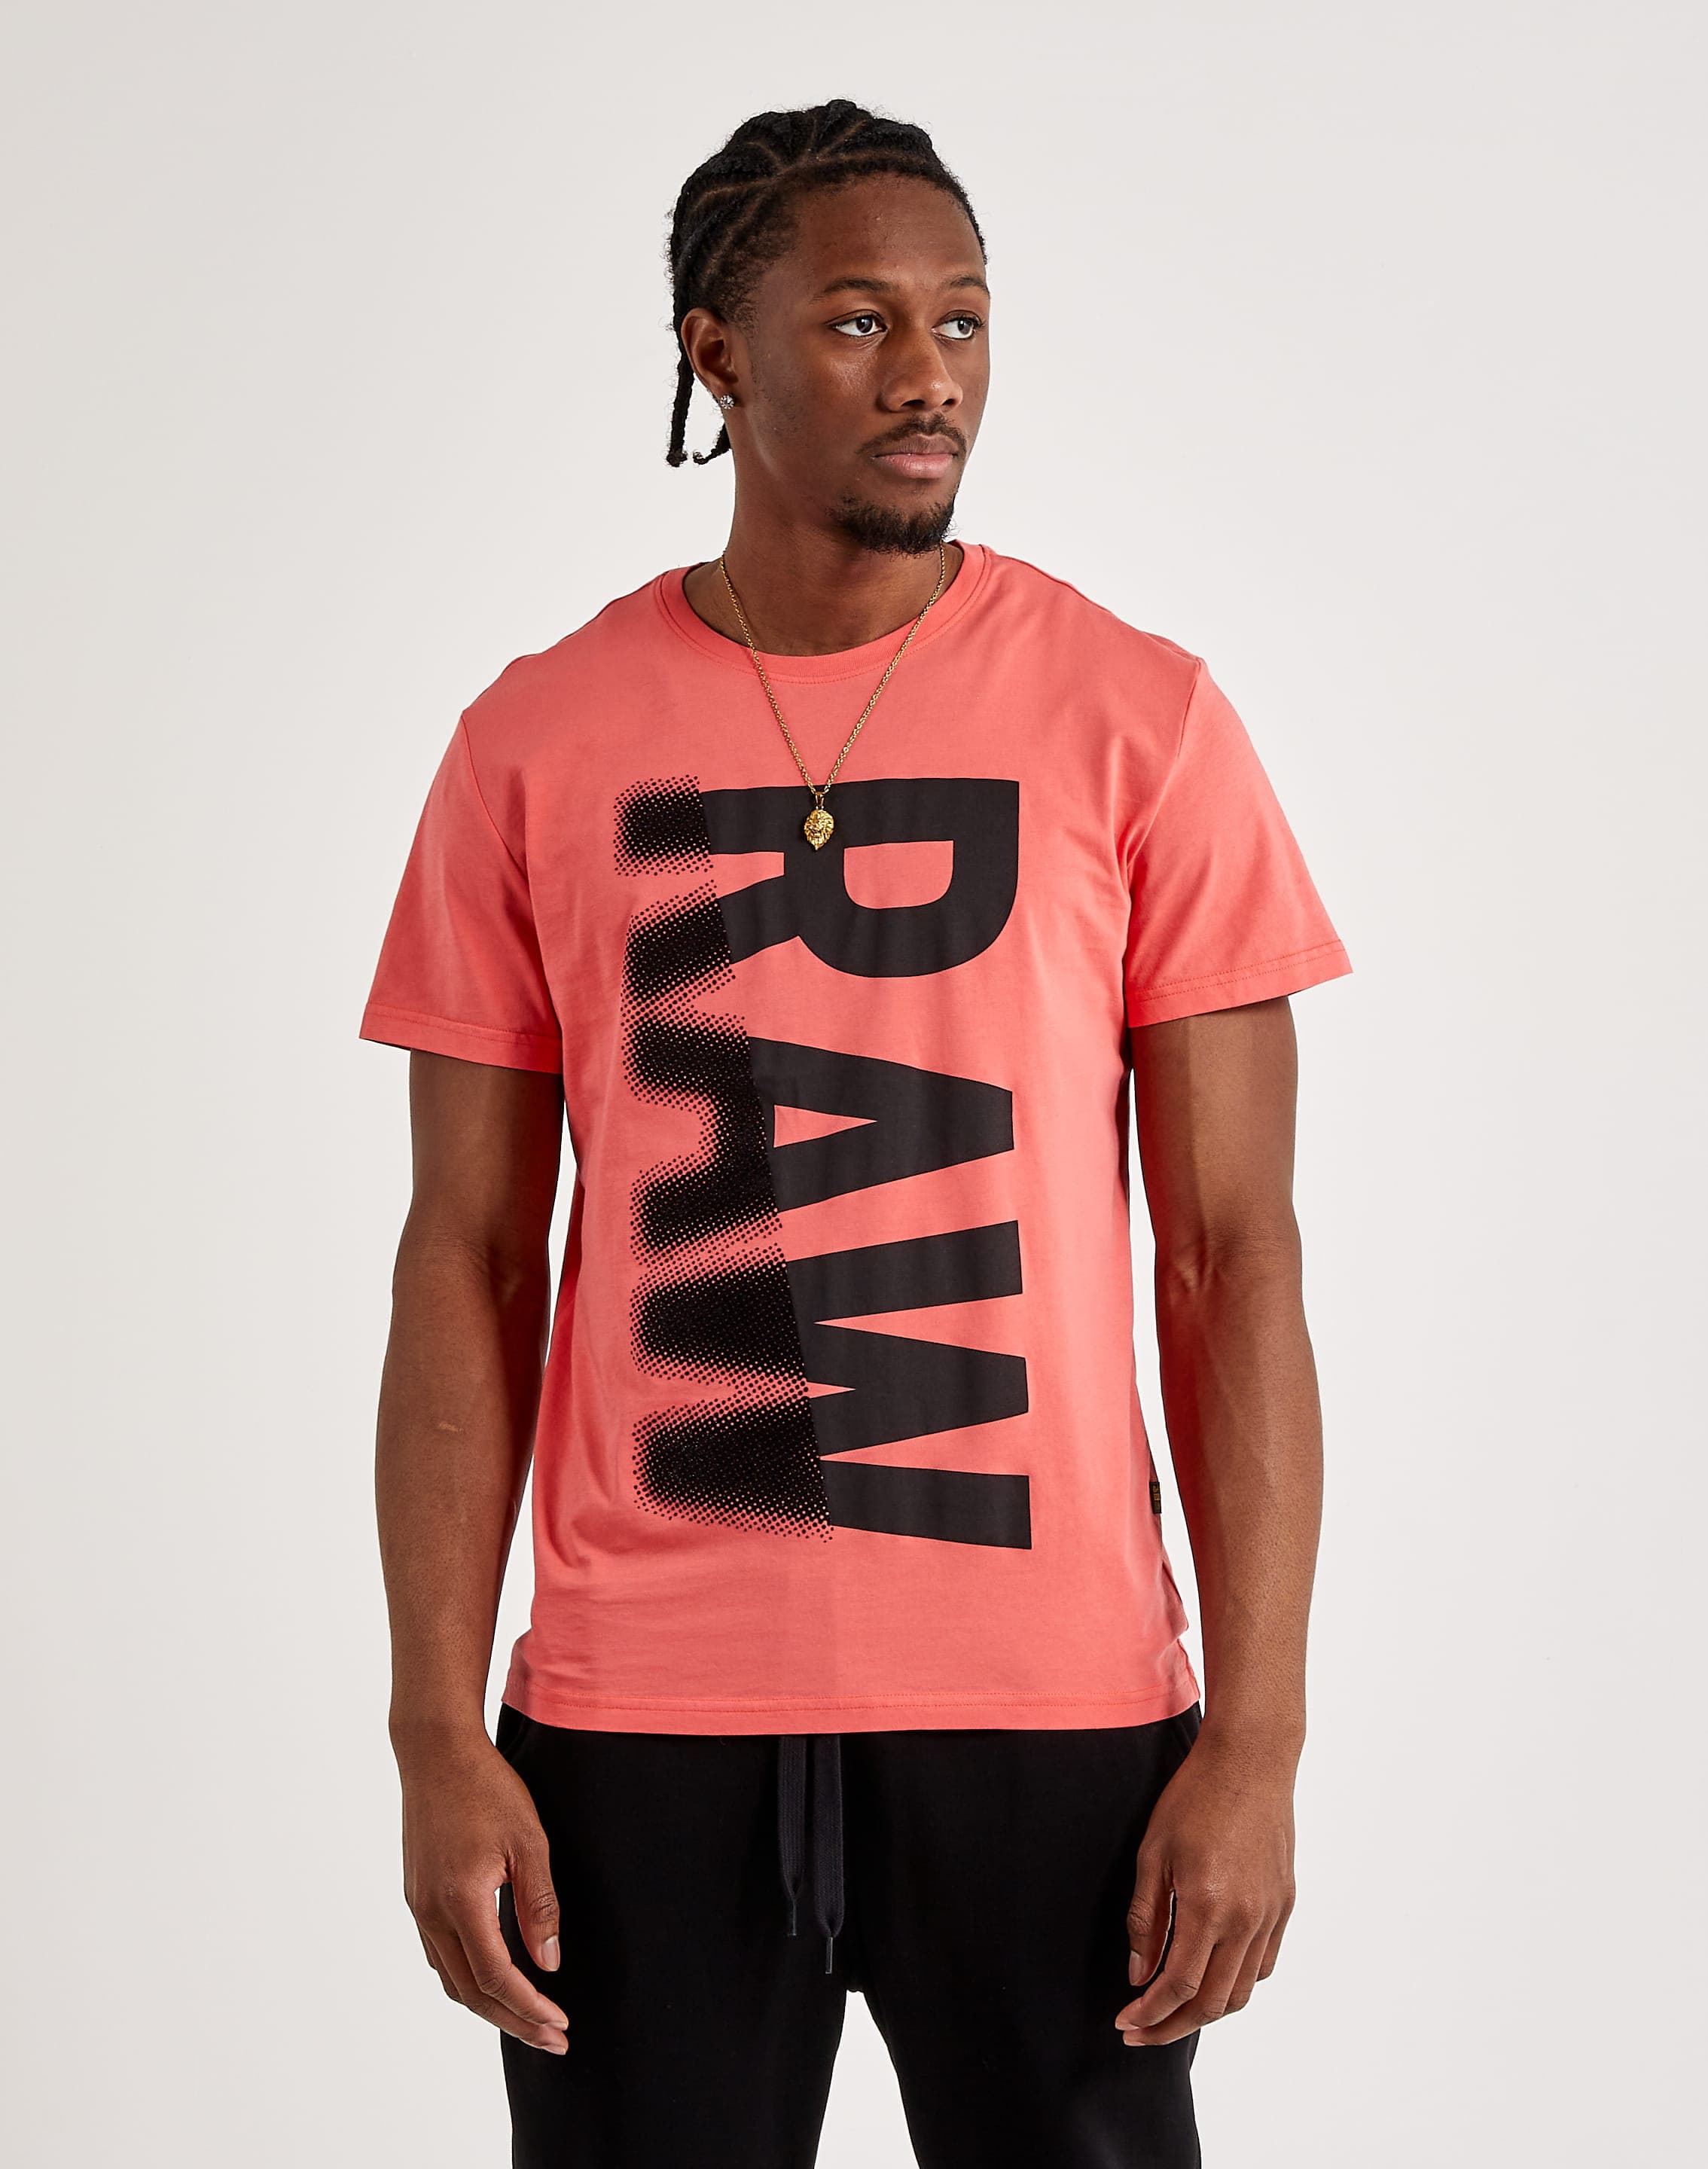 Raw DTLR – G-Star Tee Smudge